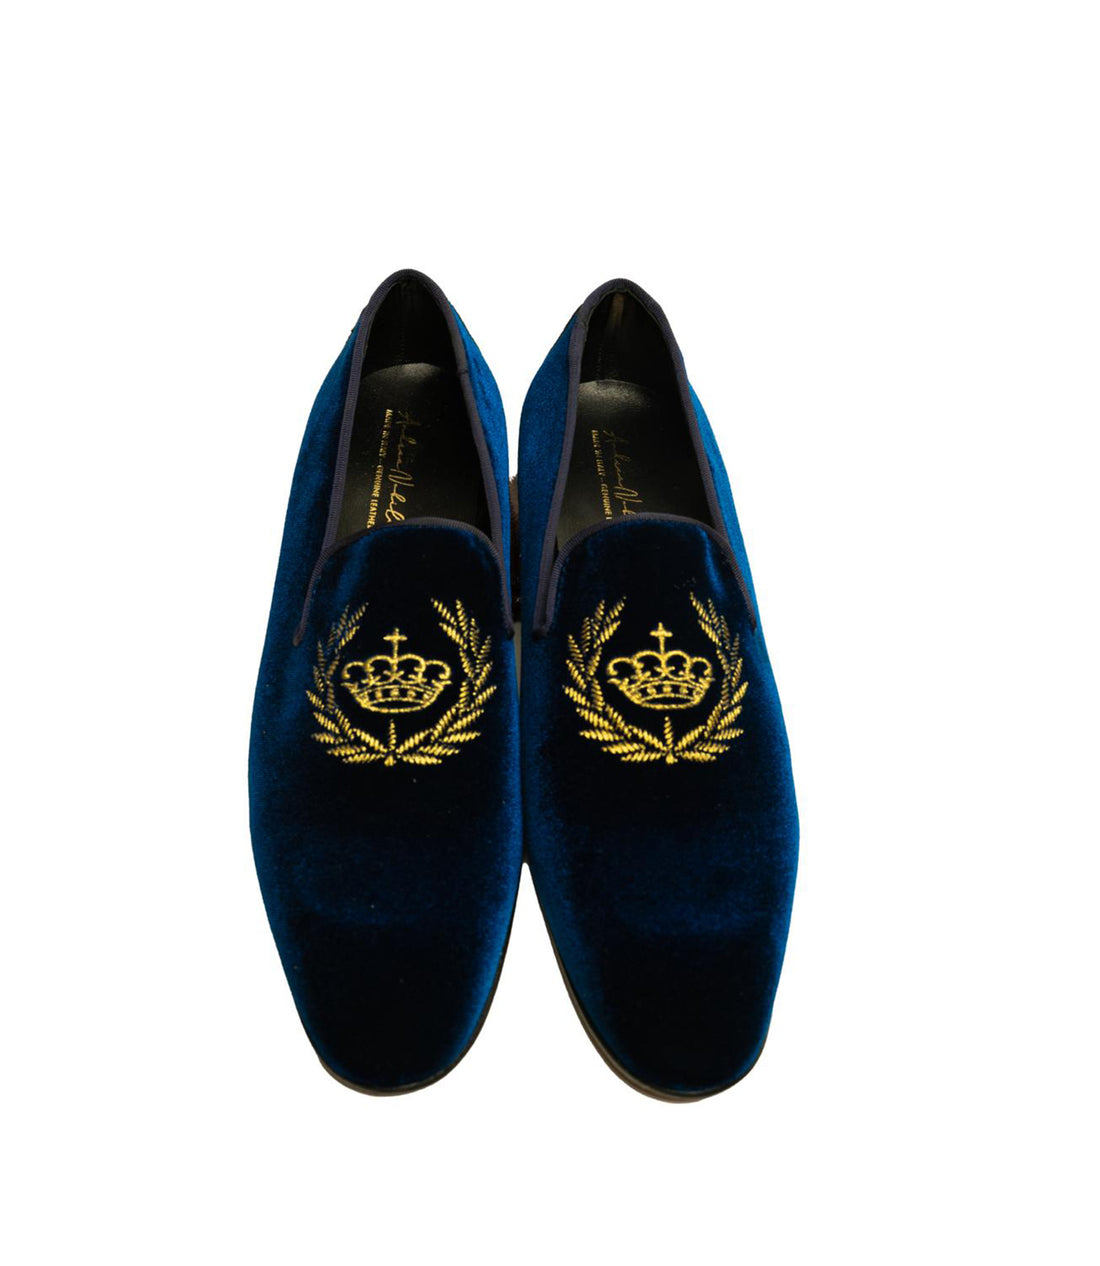 Andrea Nobile -  Navy Blue Suede Loafers with Crown Embroidery